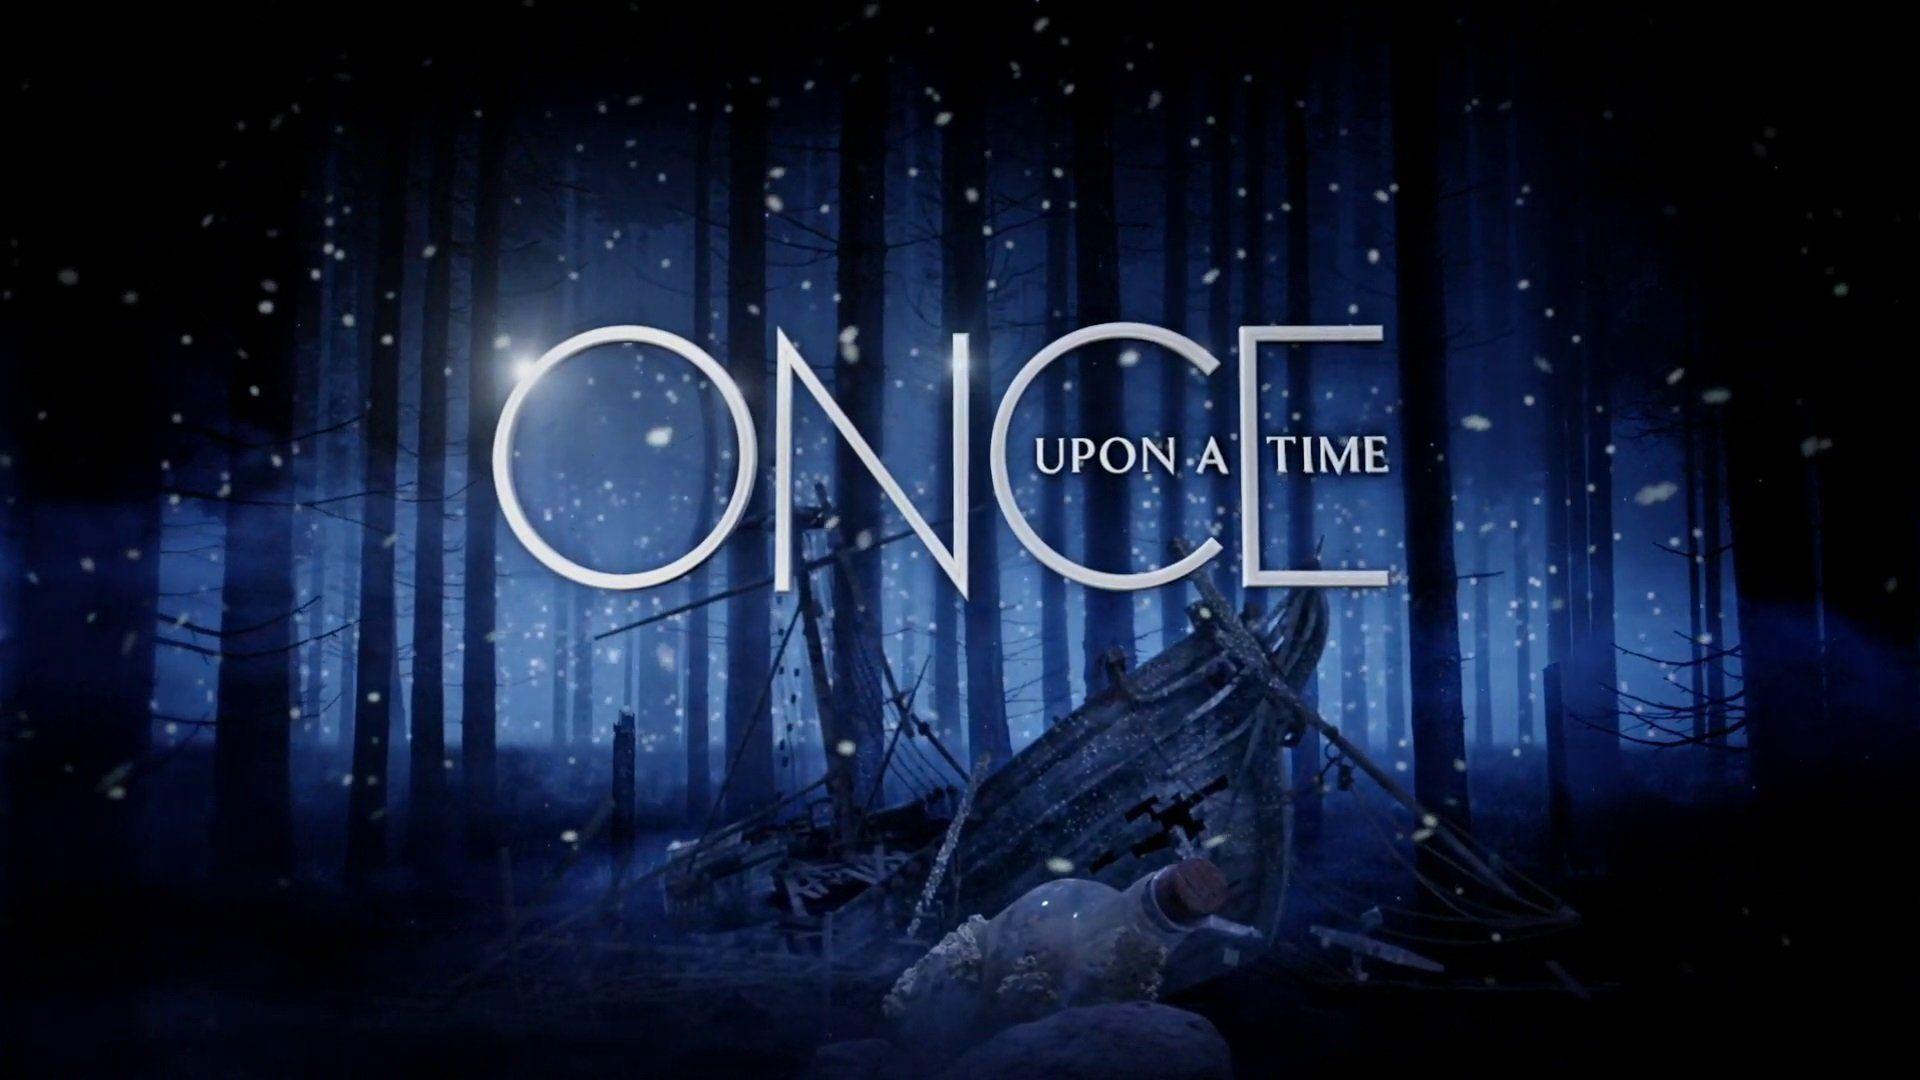 Once Upon a Time wallpaper